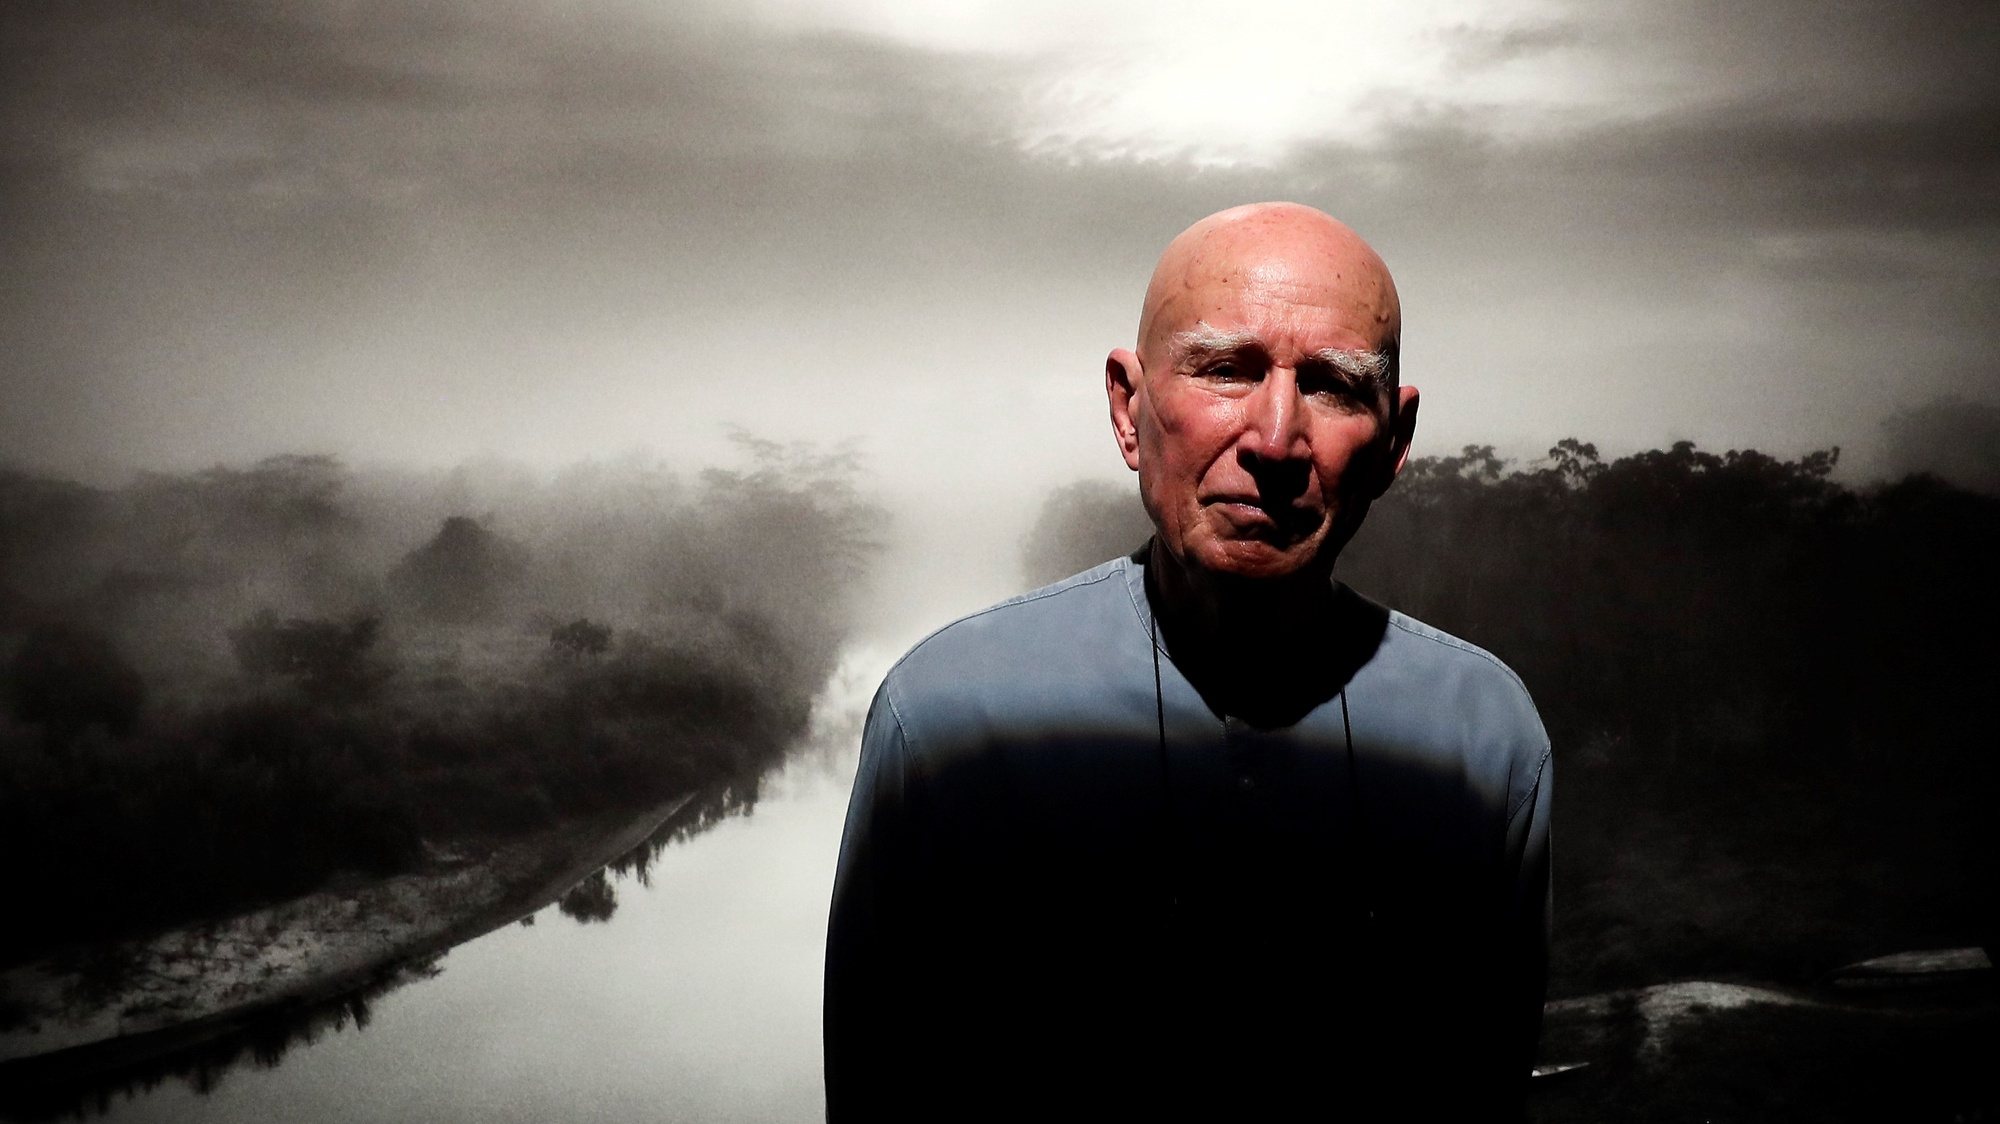 epa09756838 Brazilian documentary photographer Sebastiao Salgado poses for a photograph, during the press preview of his exhibition &#039;Amazonia&#039; at Sesc Pompeia, in Sao Paulo, Brazil, on 14 February 2022. The photographic exhibition features more than 200 images of Salgado, who spent more than six years in the Amazon working on the project, and will be open to the public from 15 February to 10 July.  EPA/Sebastiao Moreira